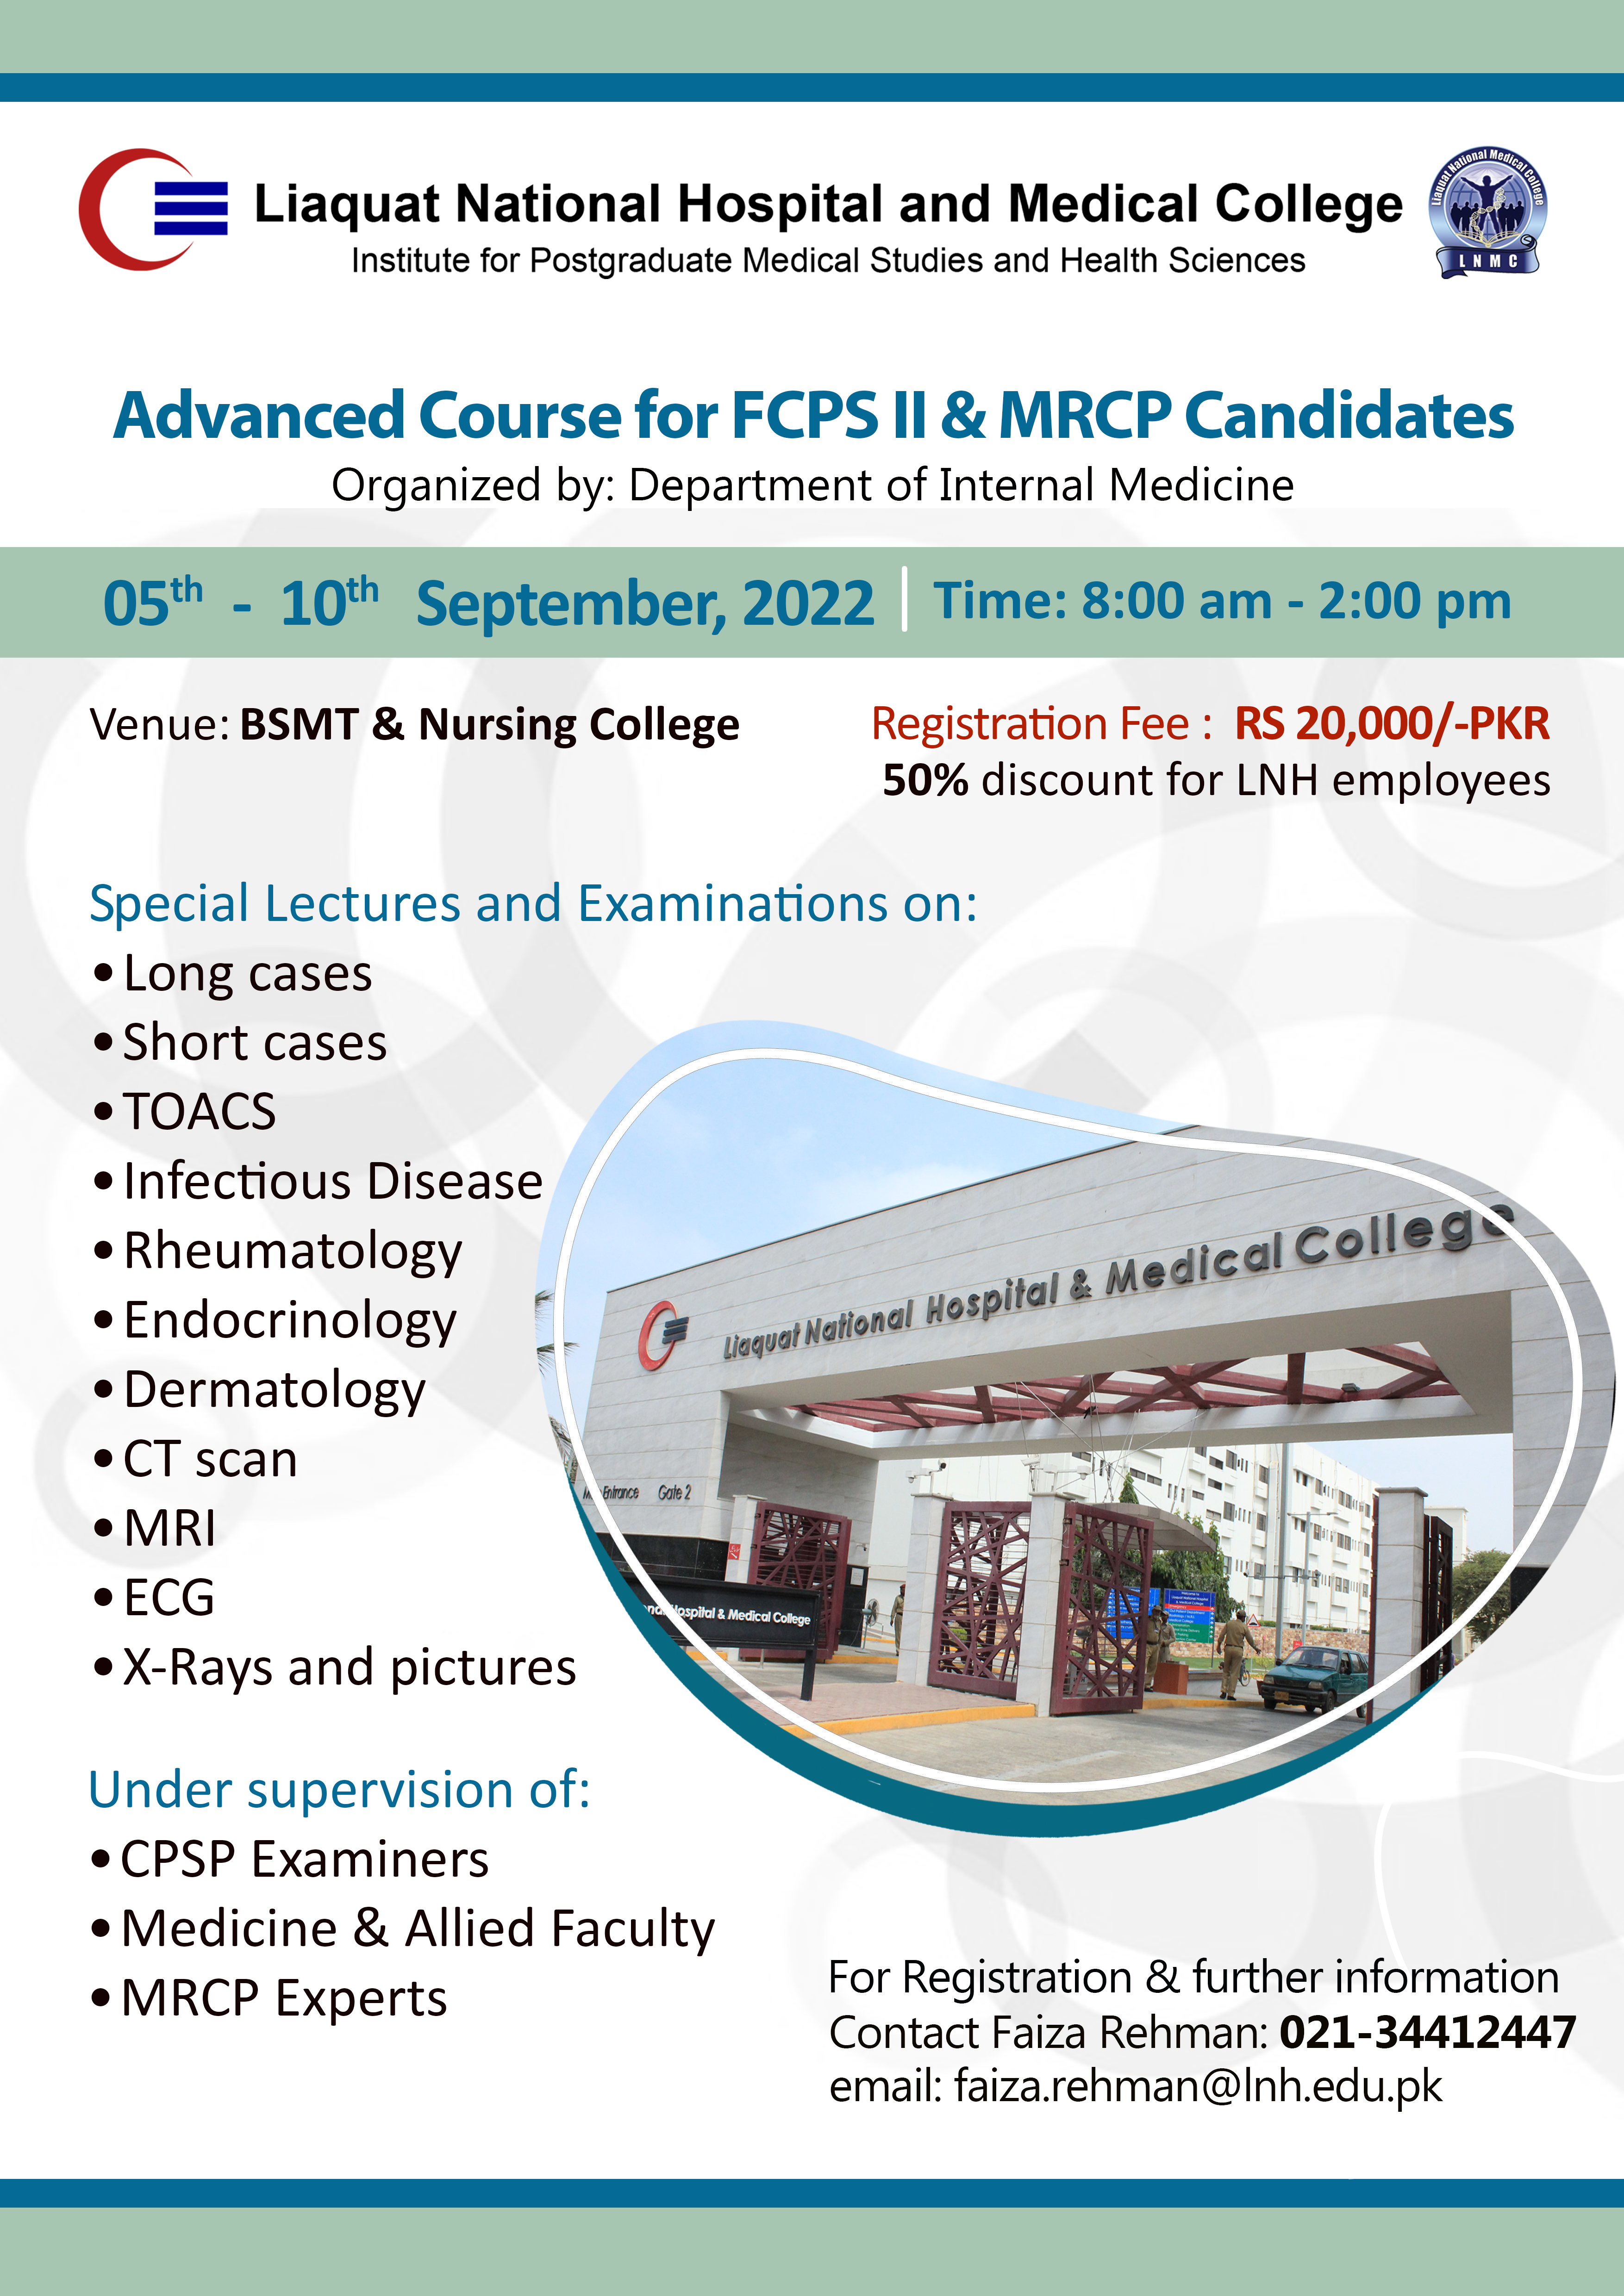 Advanced Course for FCPS II and MRCP Candidates (Internal Medicine)